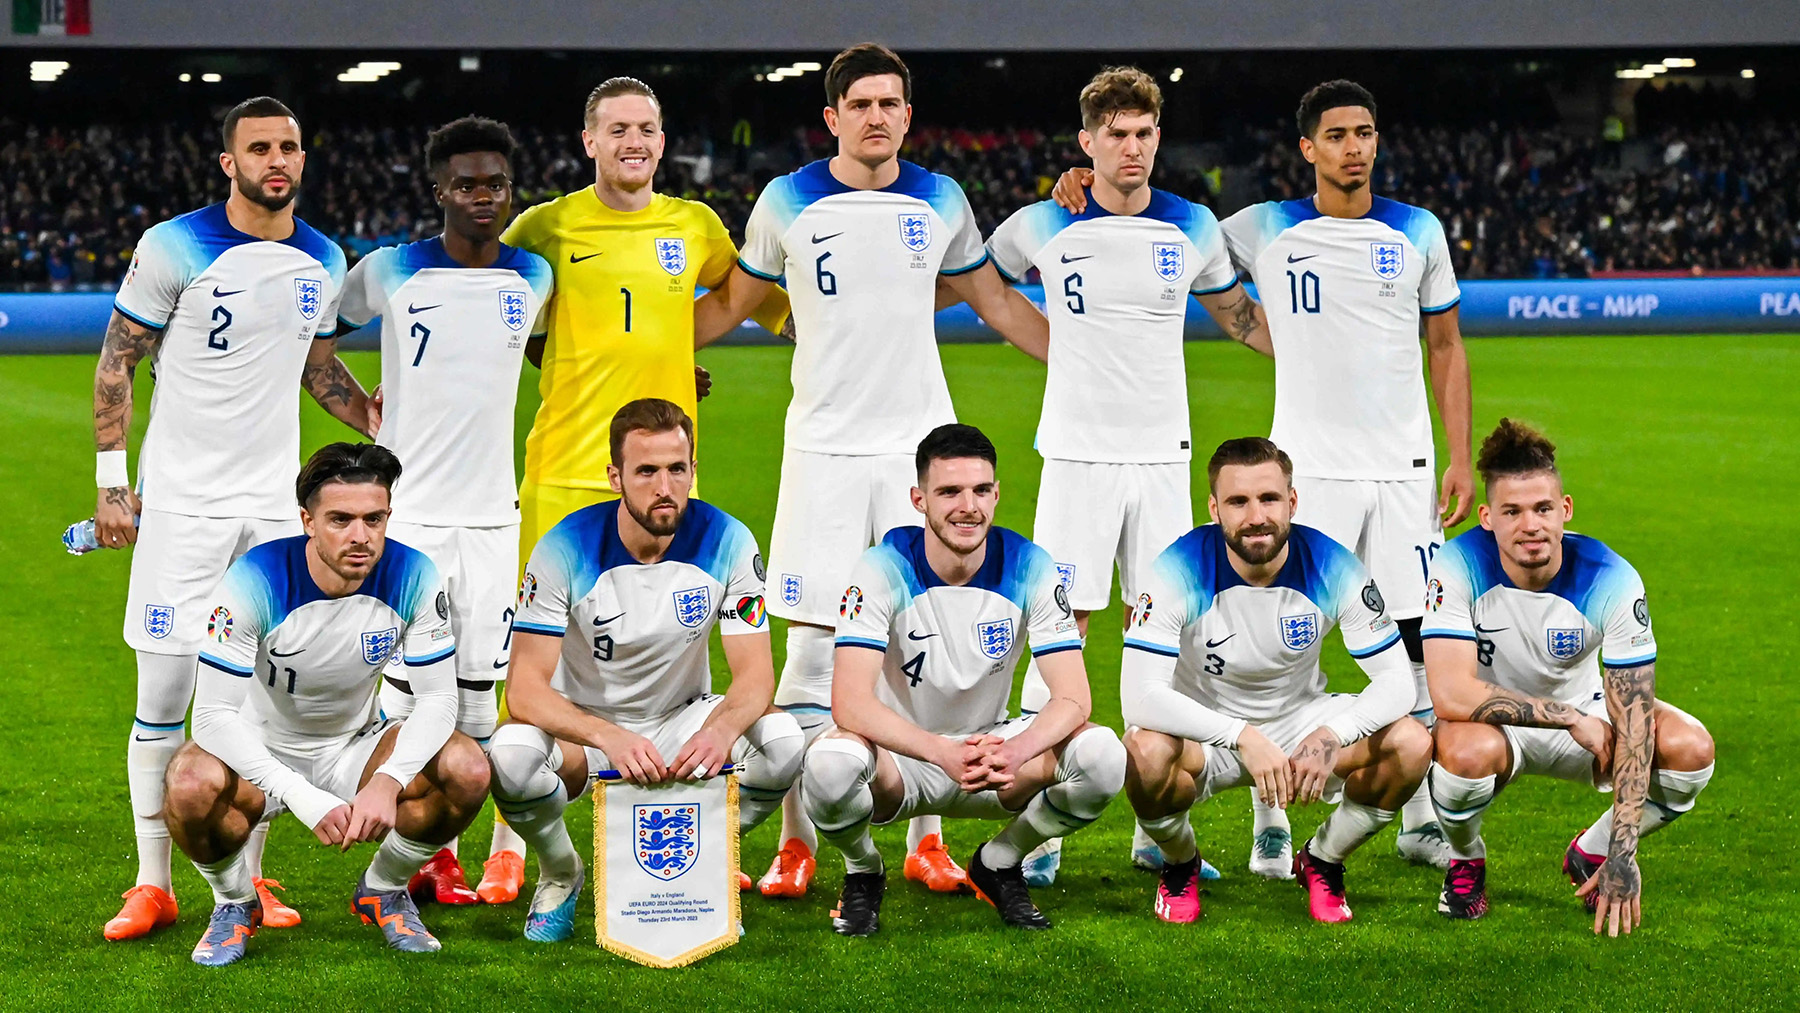  The image shows the England soccer team posing for a photo before their Euro 2024 qualifying match against Italy.